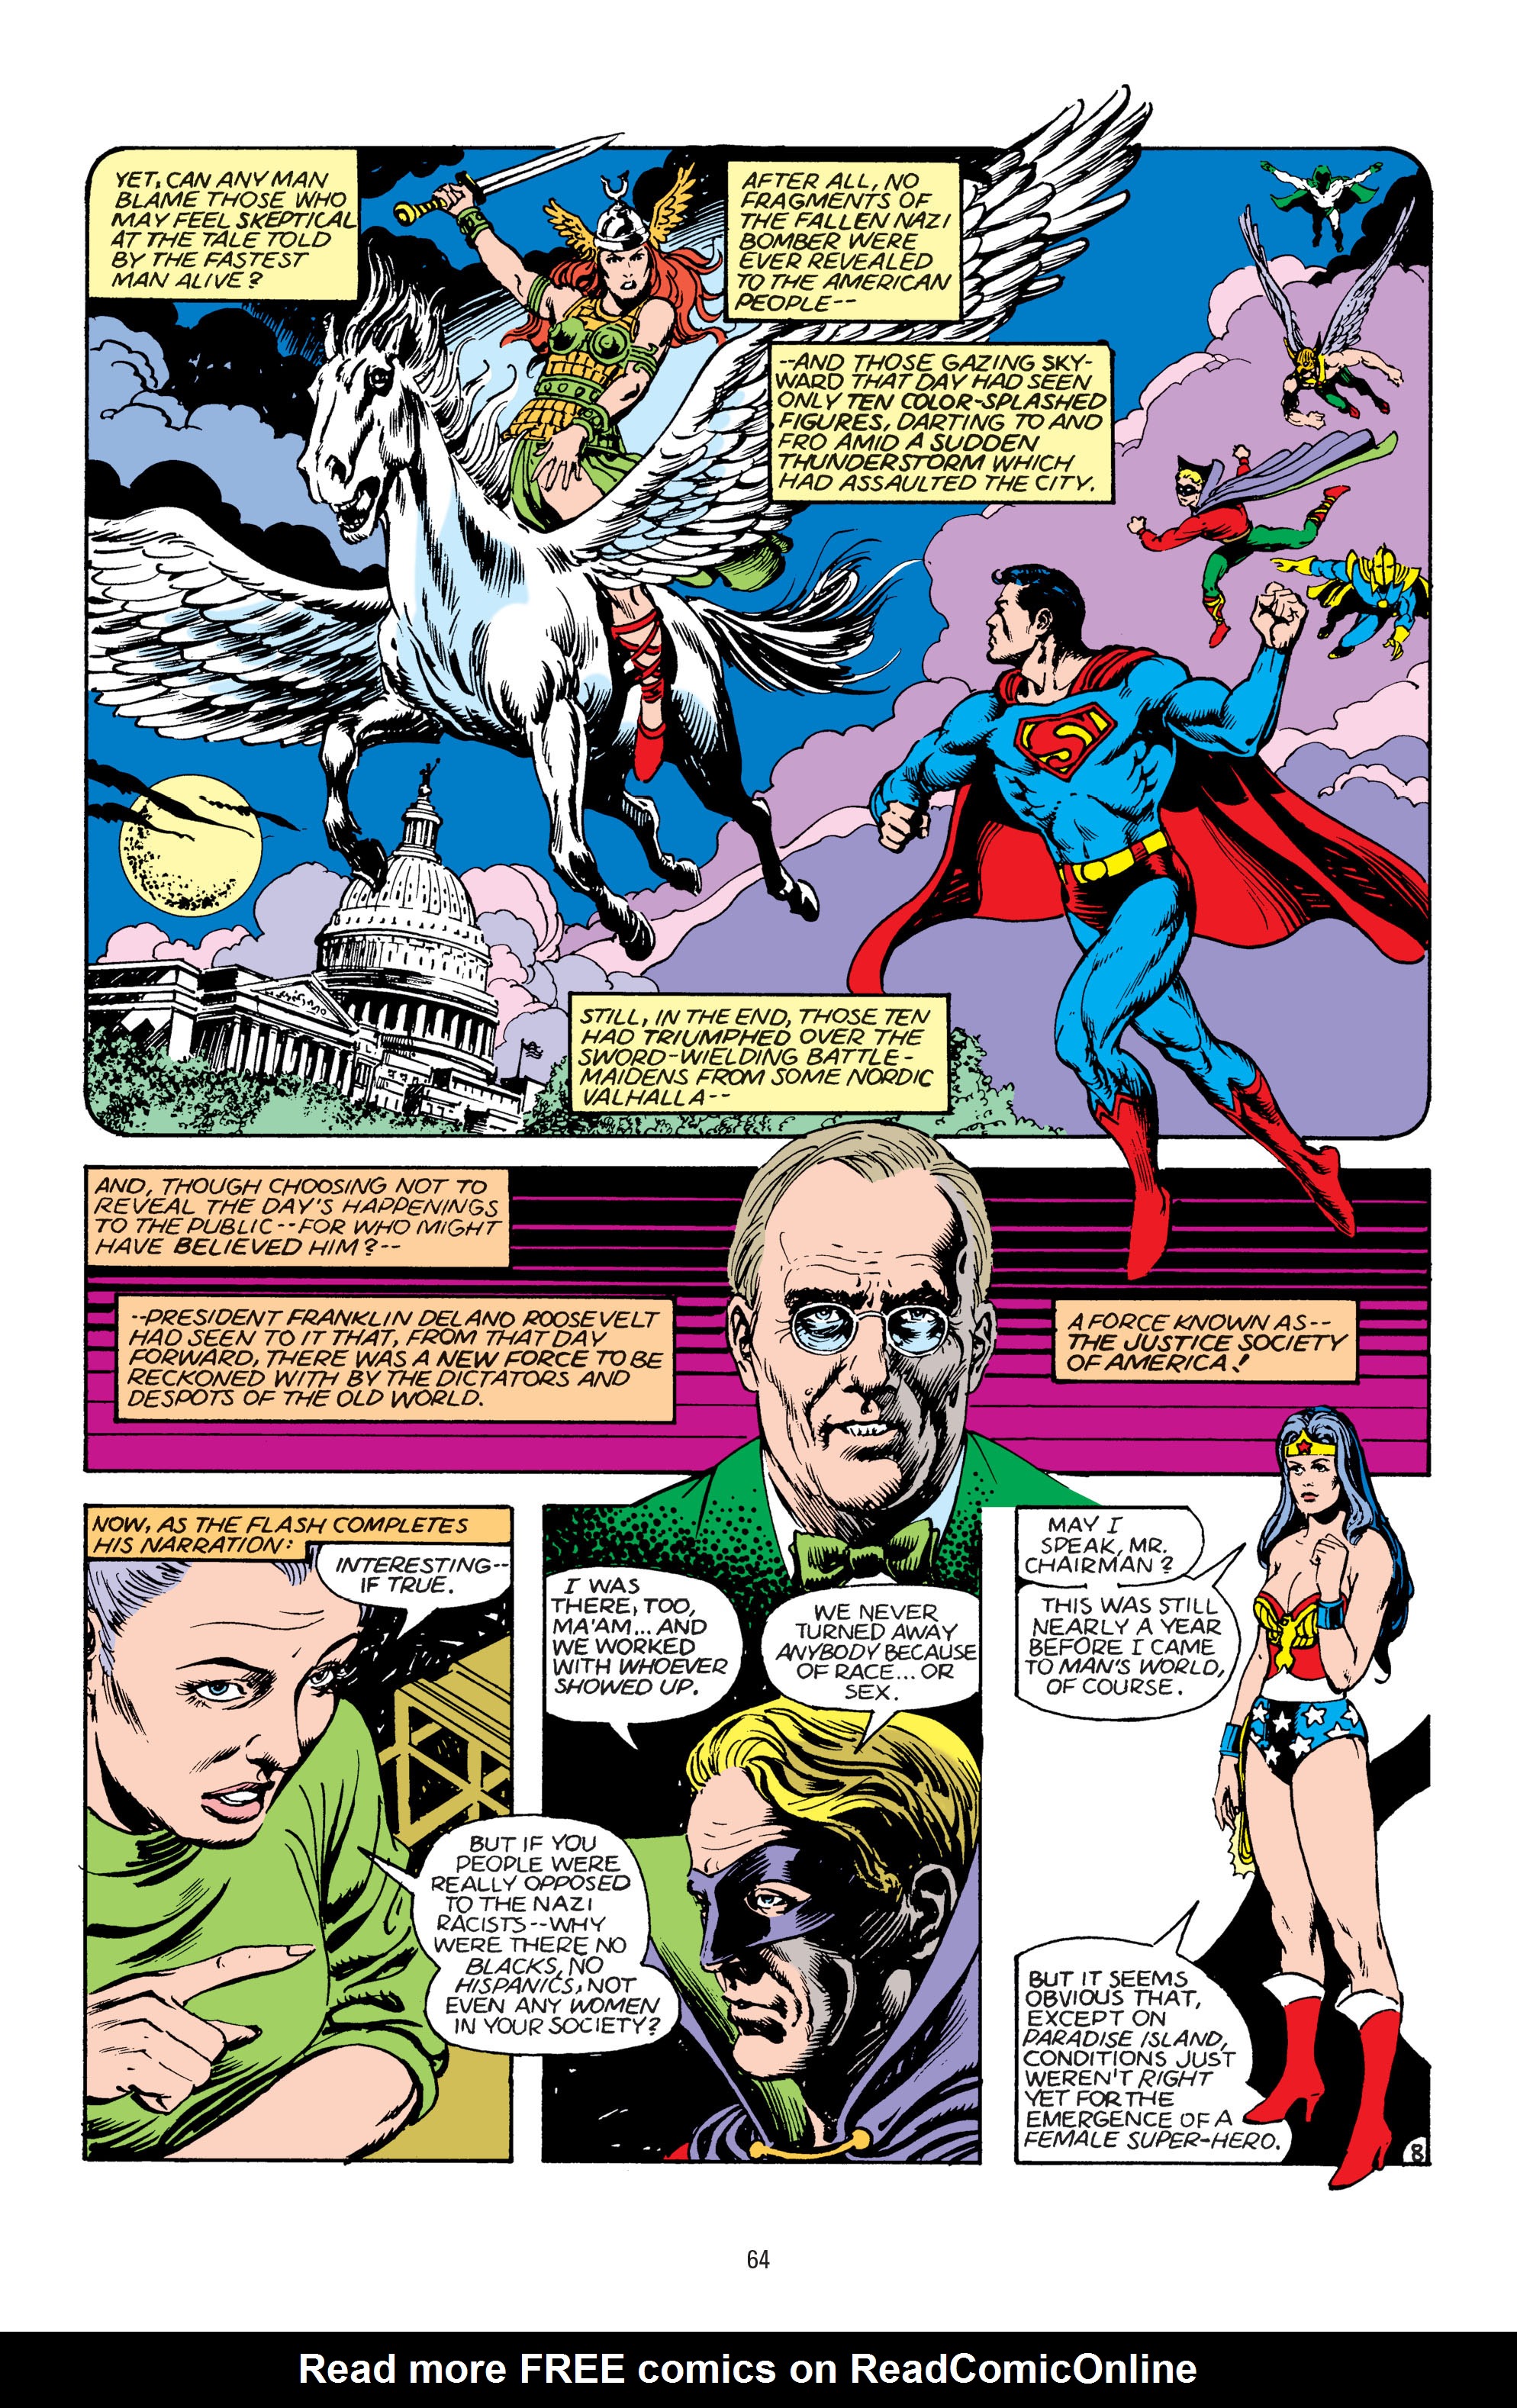 Read online America vs. the Justice Society comic -  Issue # TPB - 62